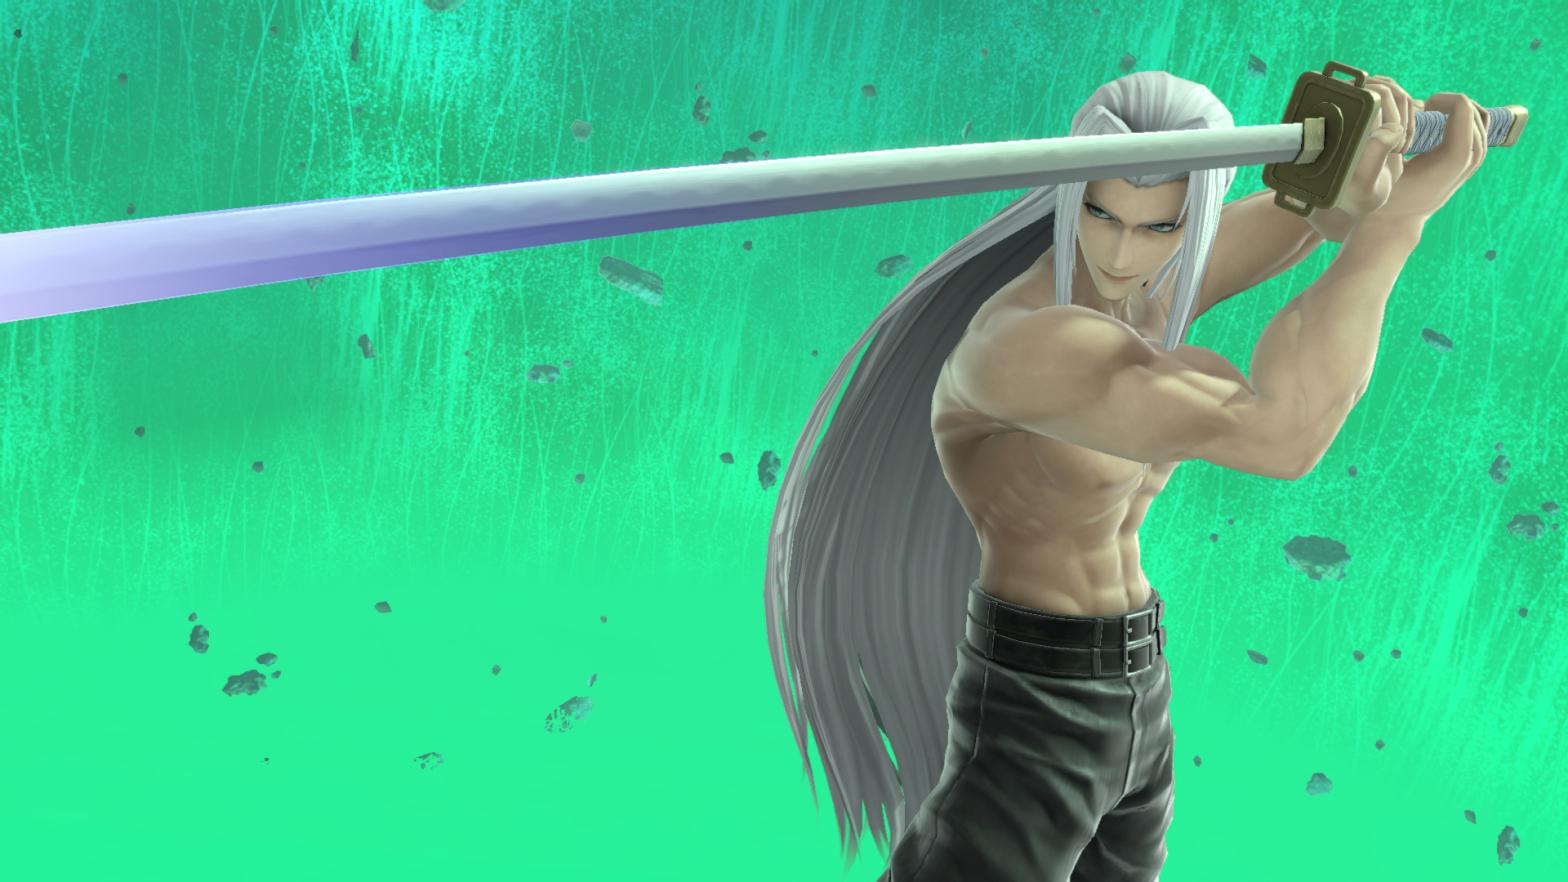 I don't know what's sharper: his sword or those abs. (Screenshot: Nintendo)